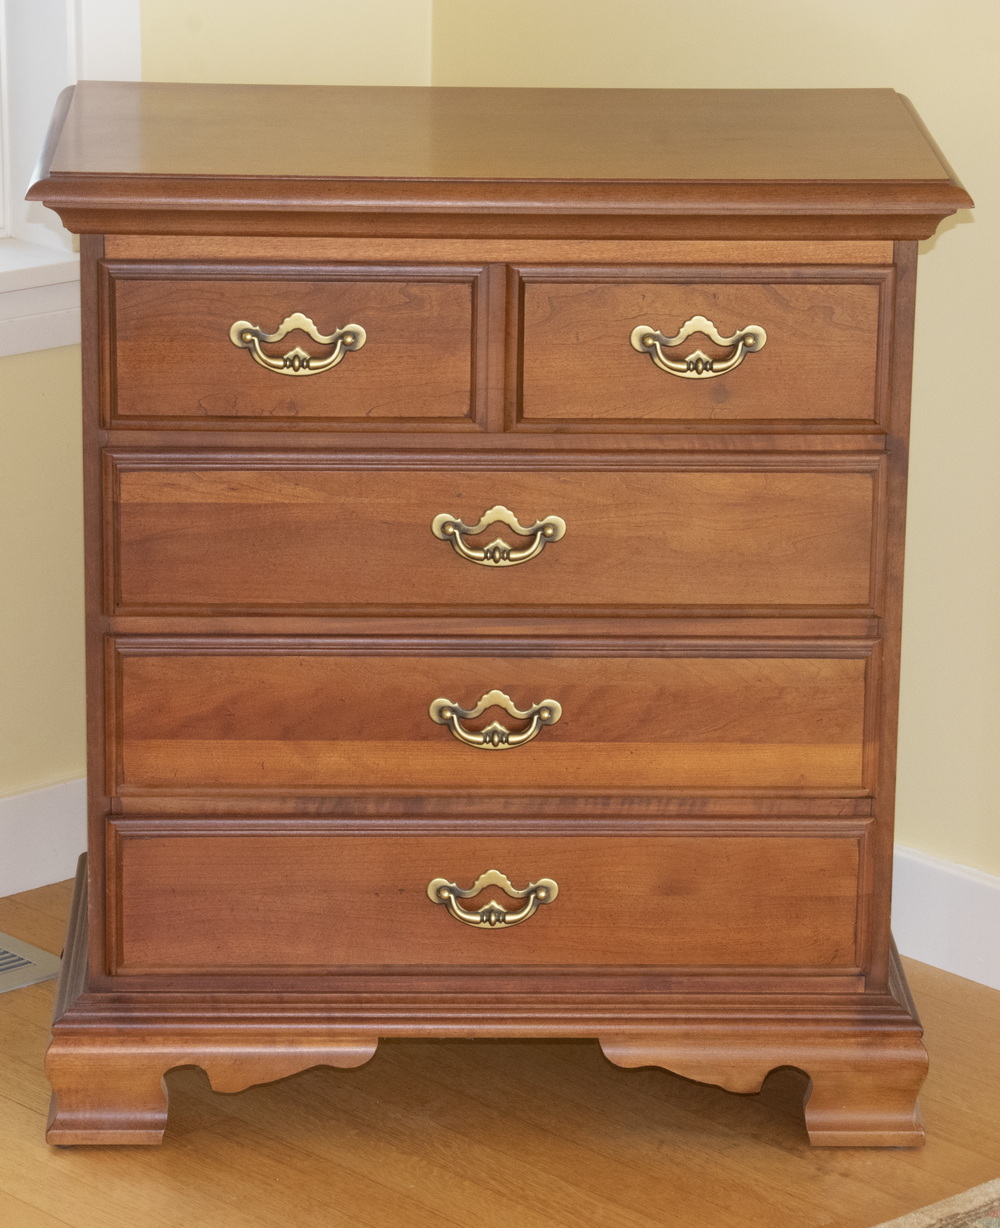 SMALL FOUR DRAWER DRESSER A small